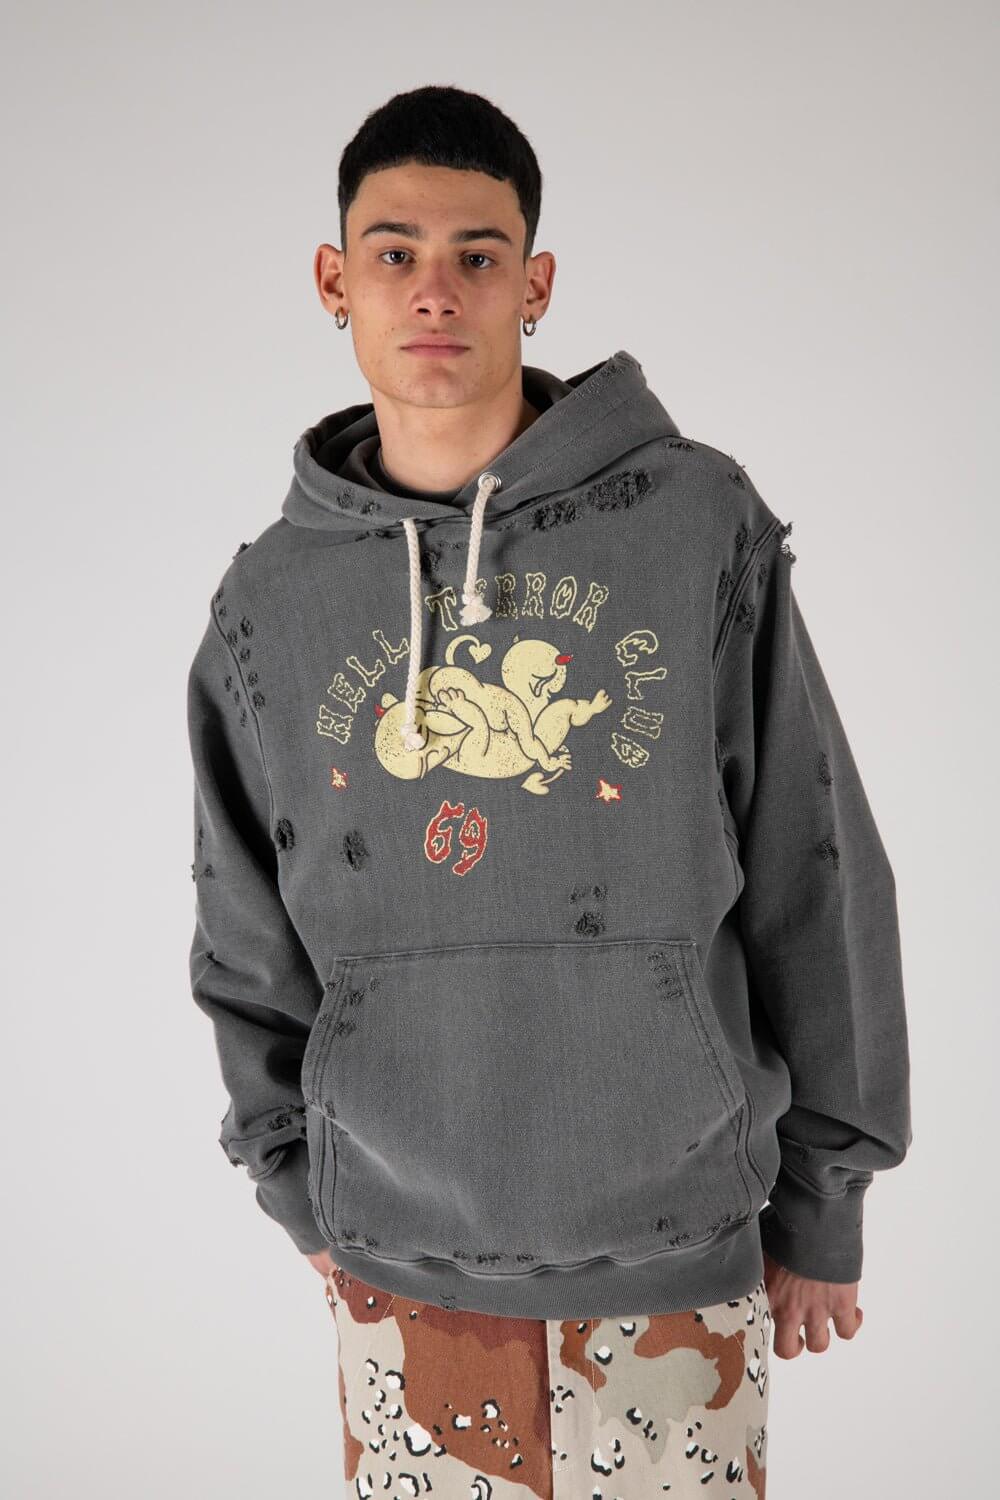 MY HOOD - DEVILS HTC devils' print distressed hoodie. Hood with drawstring, ribbed cuffs and hem. One front kangaroo pocket. Intentionally distressed areas may vary. Composition: 100% Cotton HTC LOS ANGELES